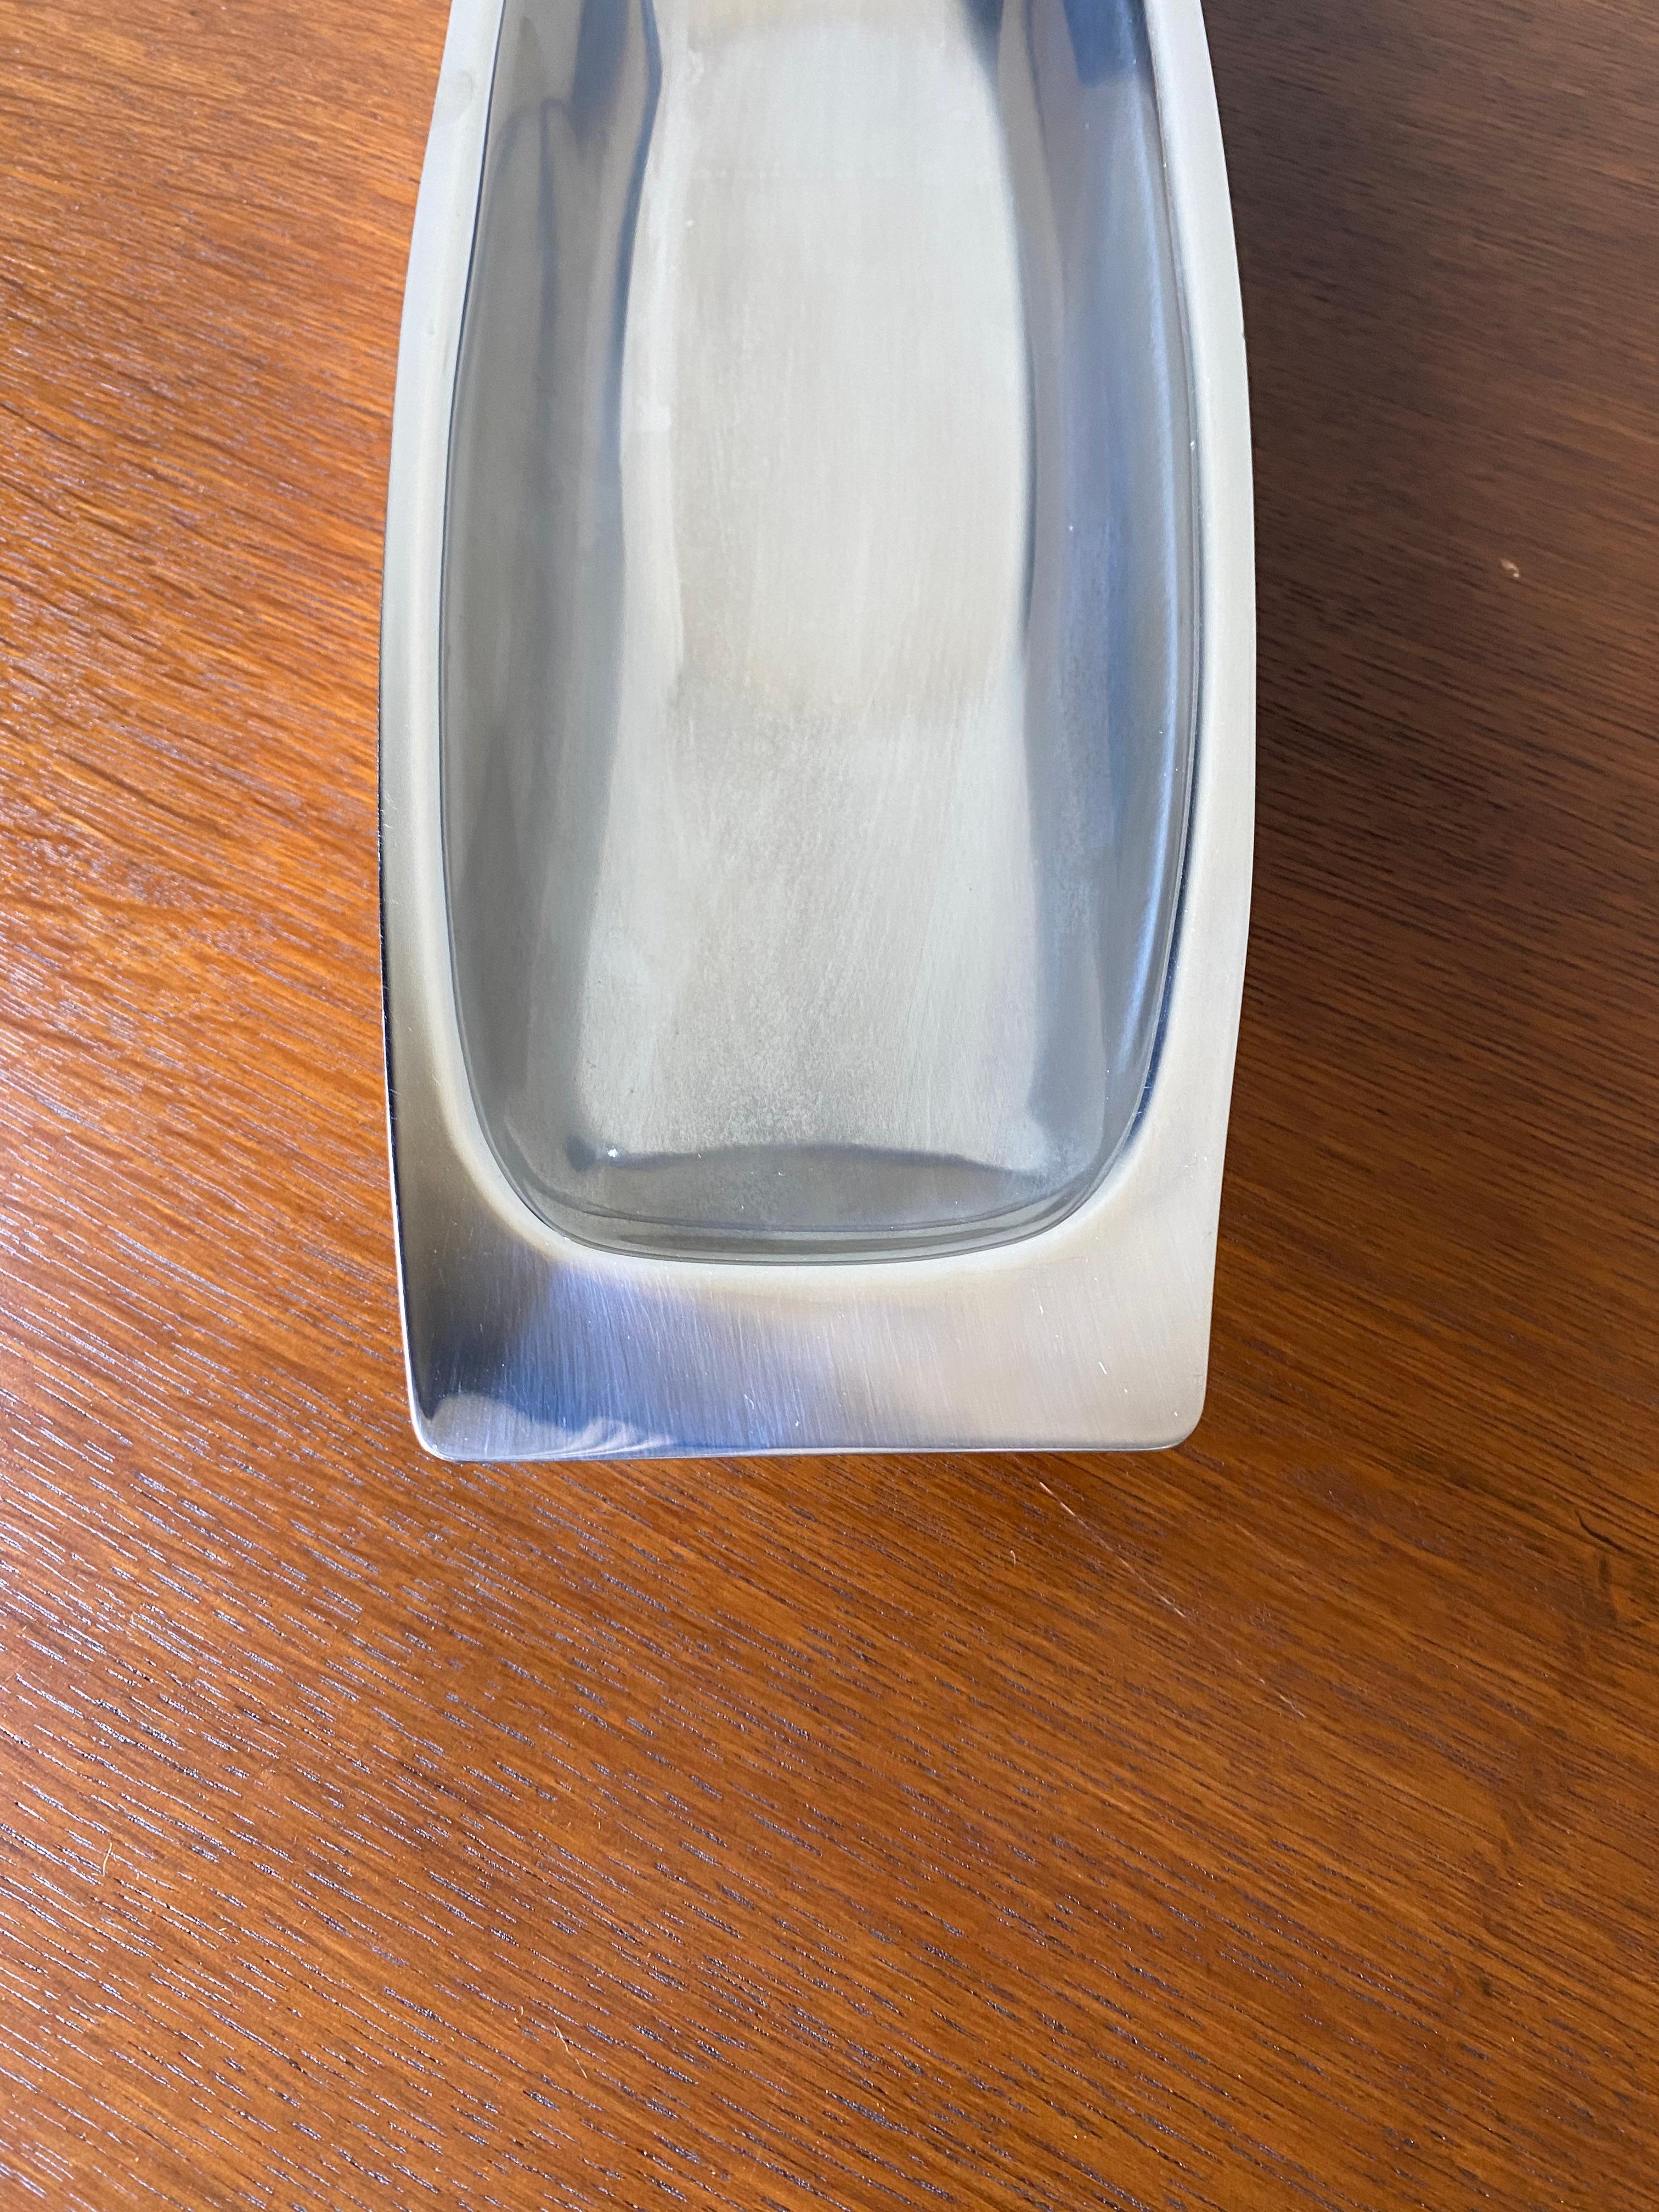 Stainless Steel Serving Tray By Lundtofte, Denmark 1960s For Sale 4